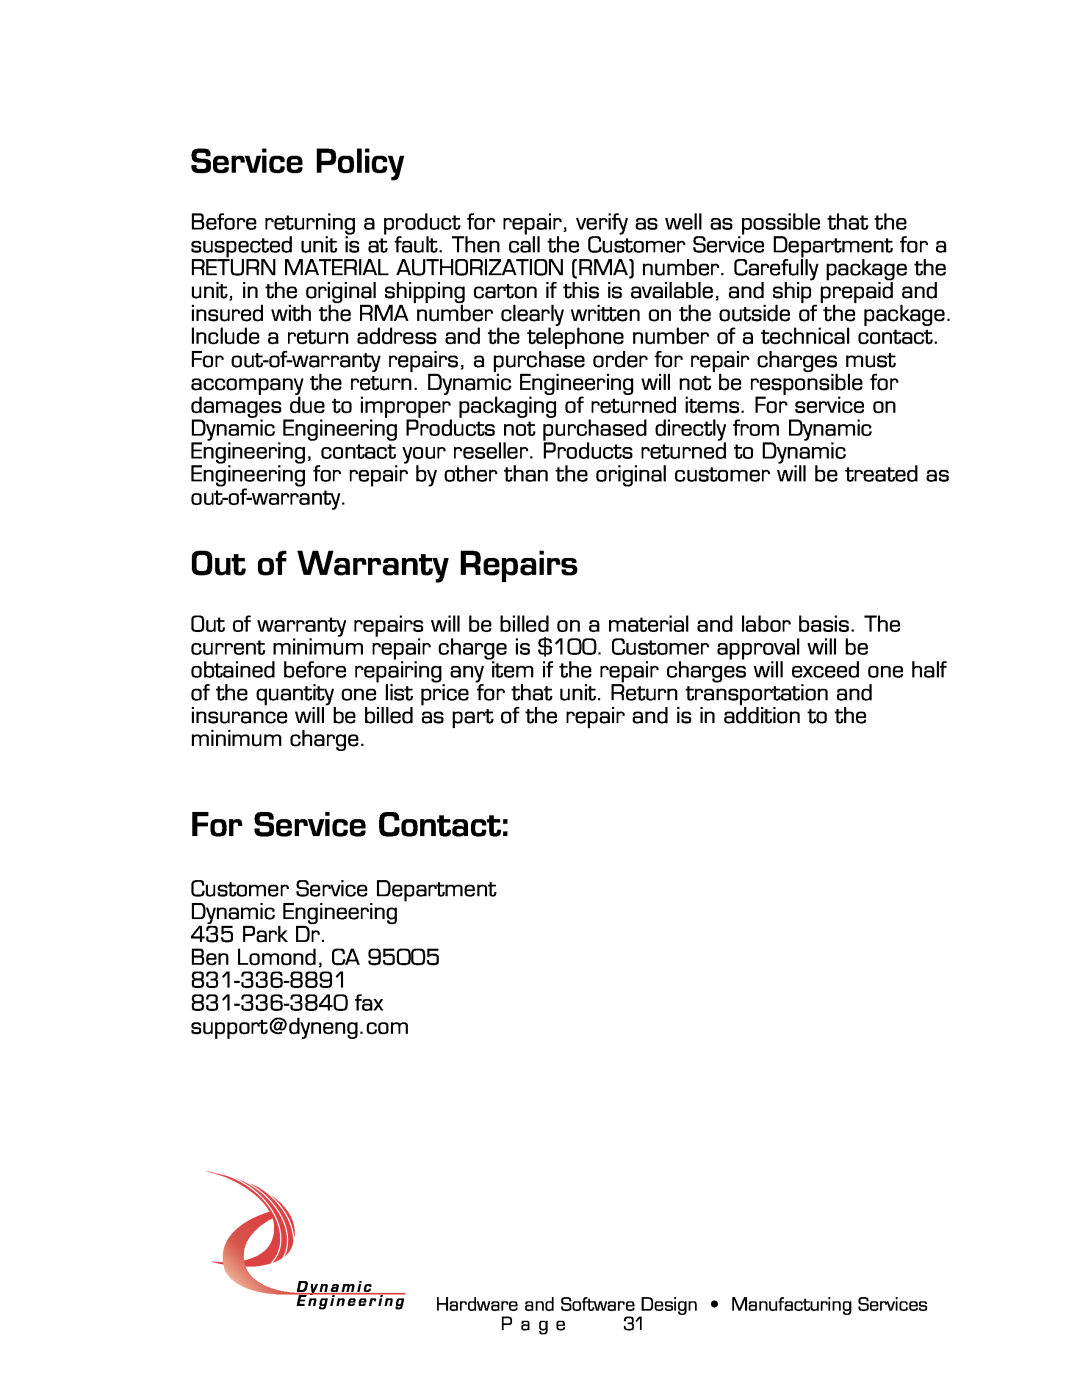 American Dynamics PMC-4U-CACI user manual Service Policy, Out of Warranty Repairs, For Service Contact 